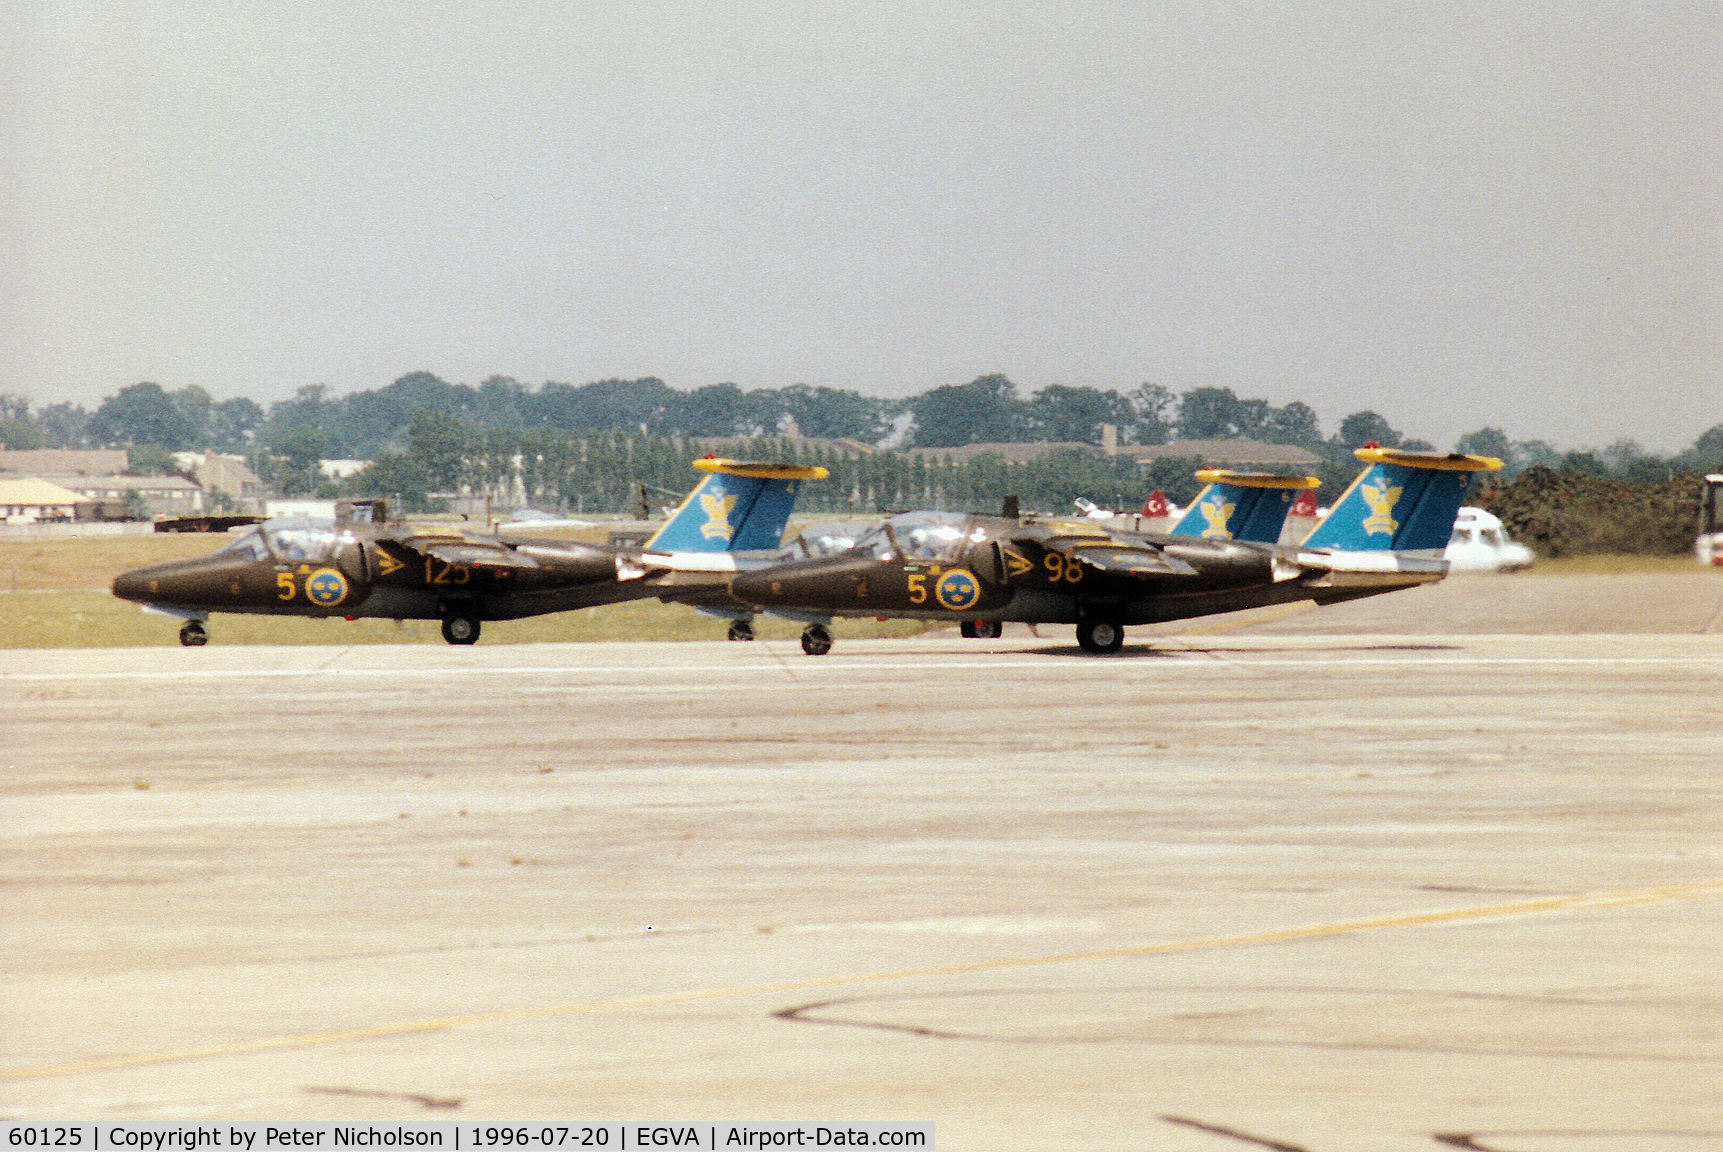 60125, Saab Sk.60A C/N 60-125, Saab Sk.60A of the Royal Swedish Air Force's display team Team 60 preparing for take-off together with companion 60098 at the 1996 Royal Intnl Air Tattoo at RAF Fairford.